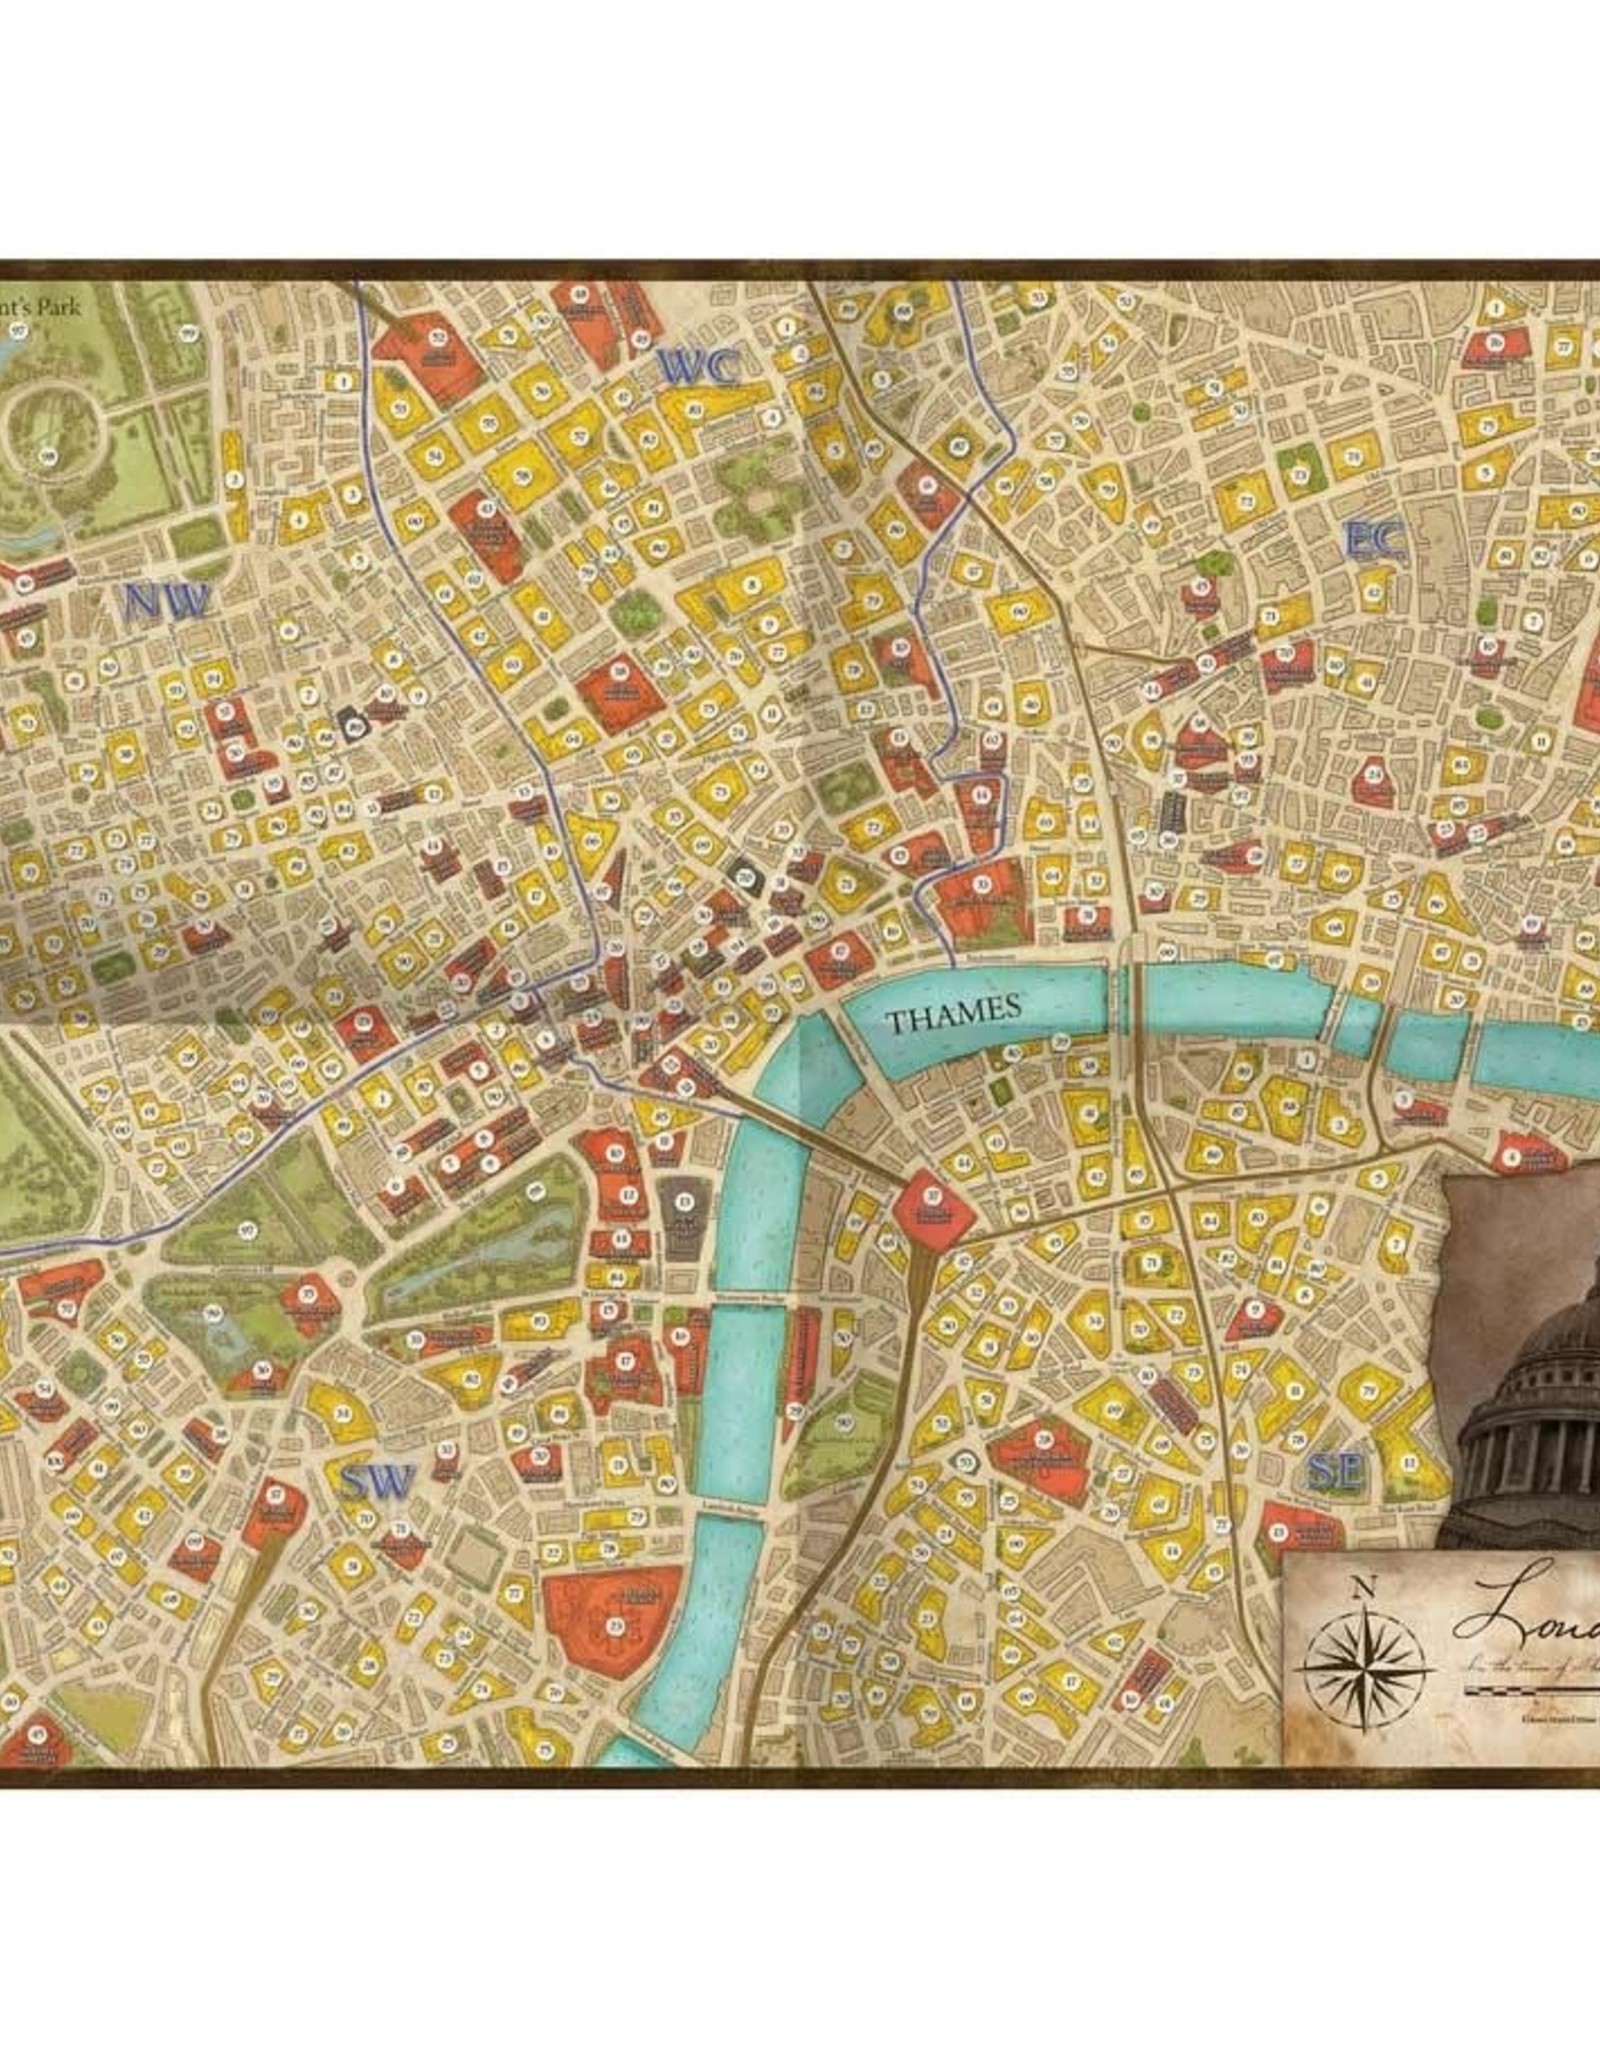 Sherlock Holmes Consulting Detective Carlton House and Queen's Park